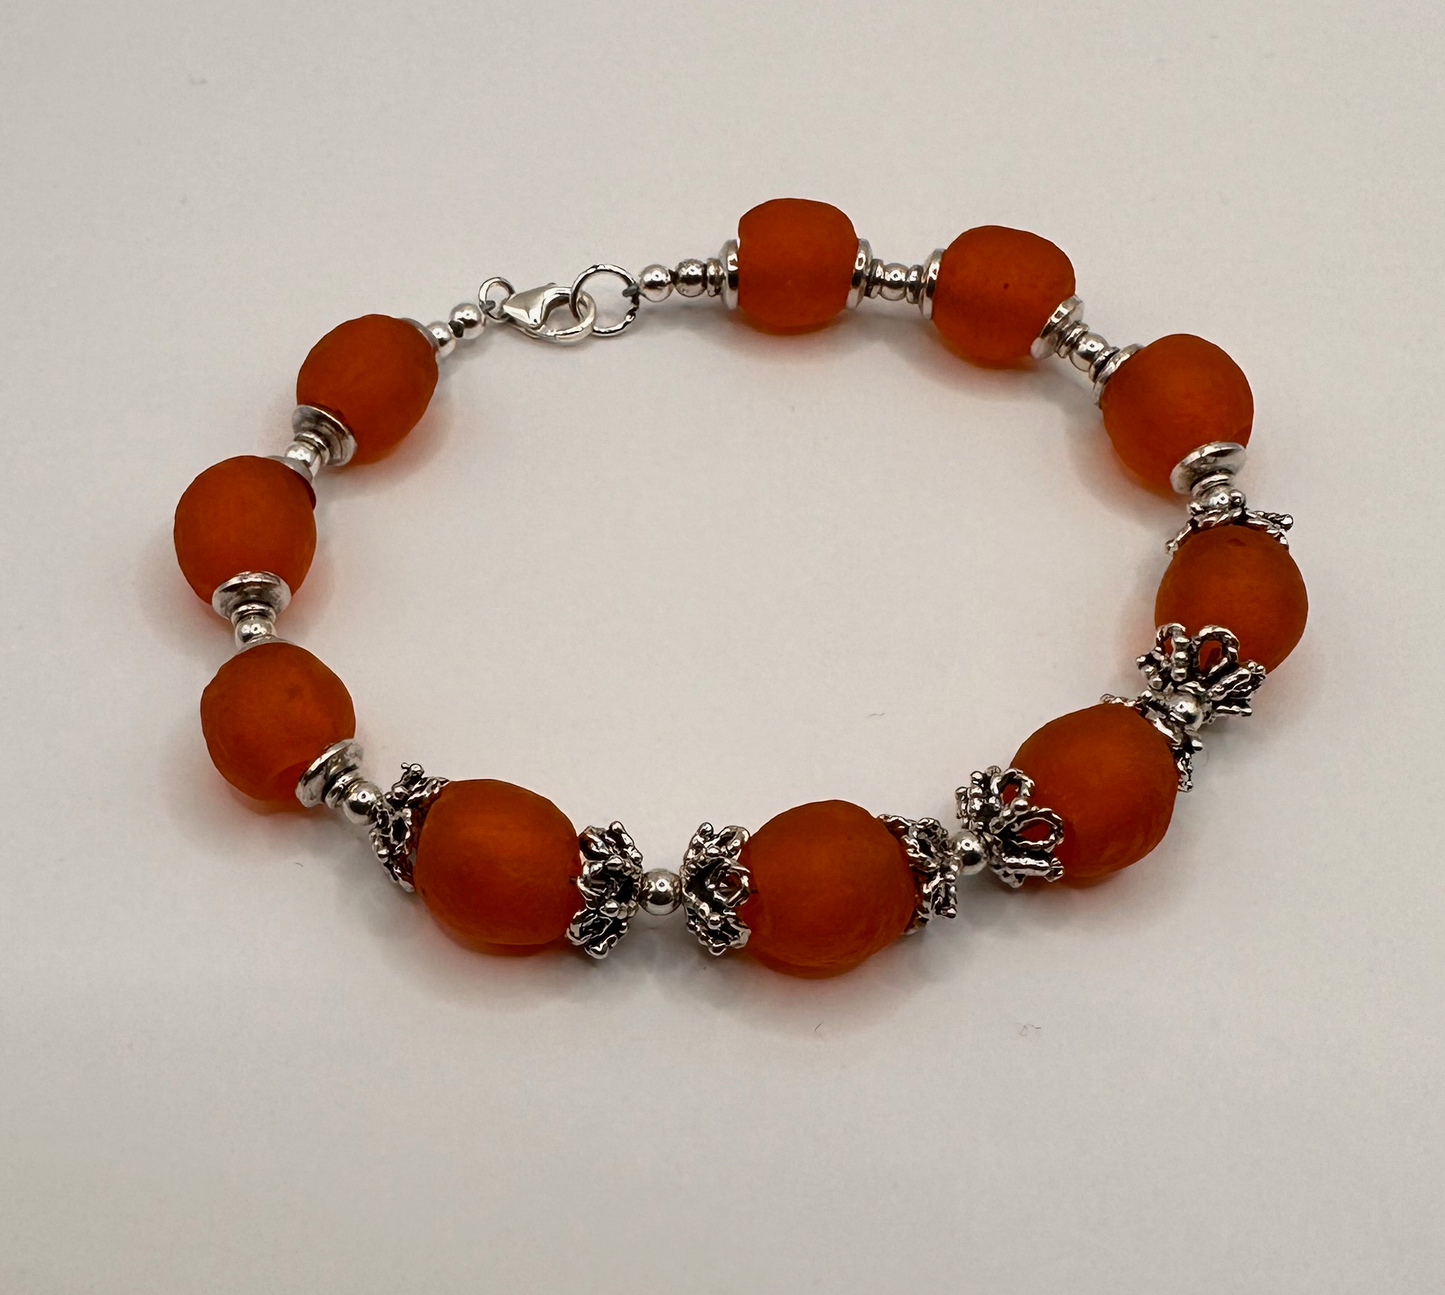 African Orange Recycle Bead with Sterling Silver Accent Bead Bracelet